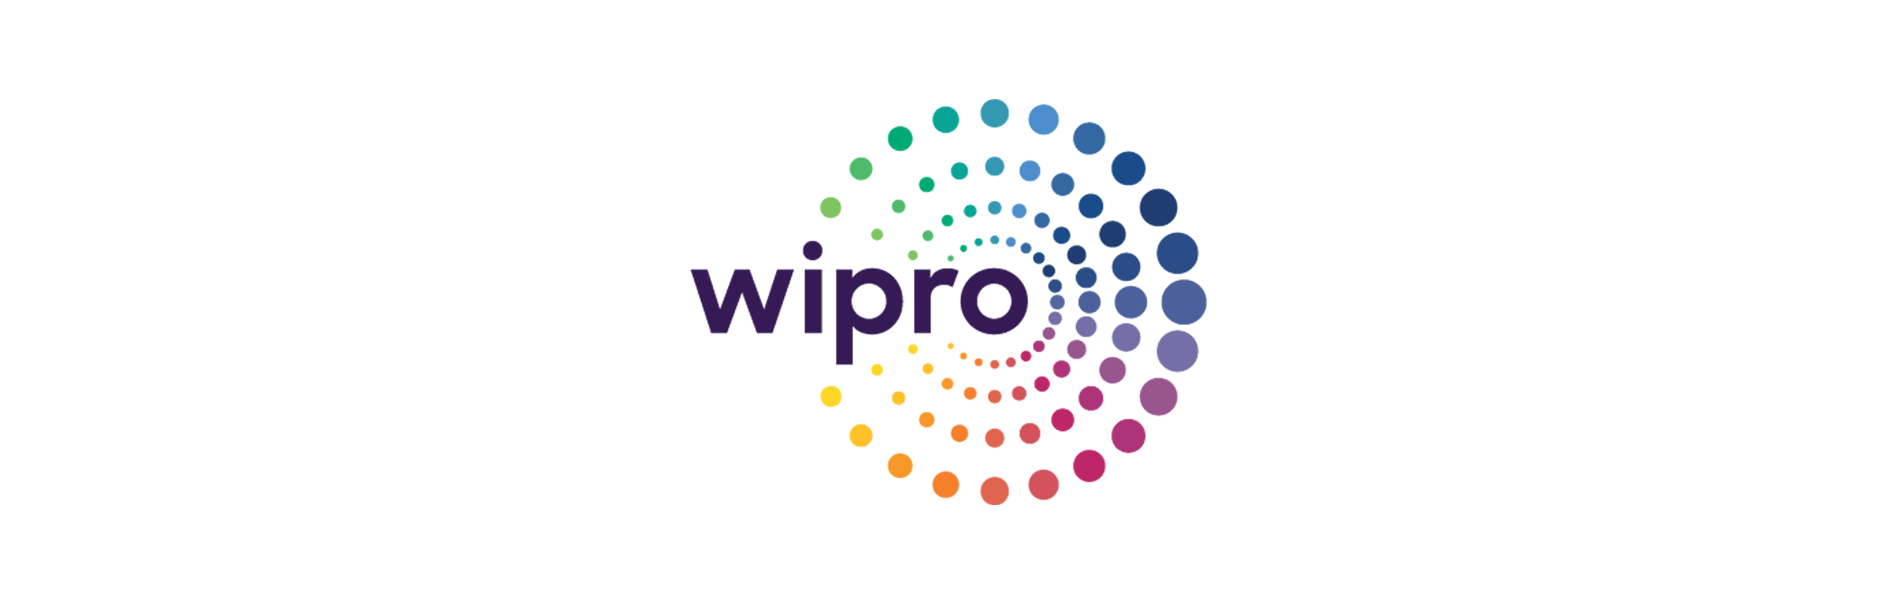 Privacy Resilient Workplace: eBook by Wipro and Microsoft for Data Privacy